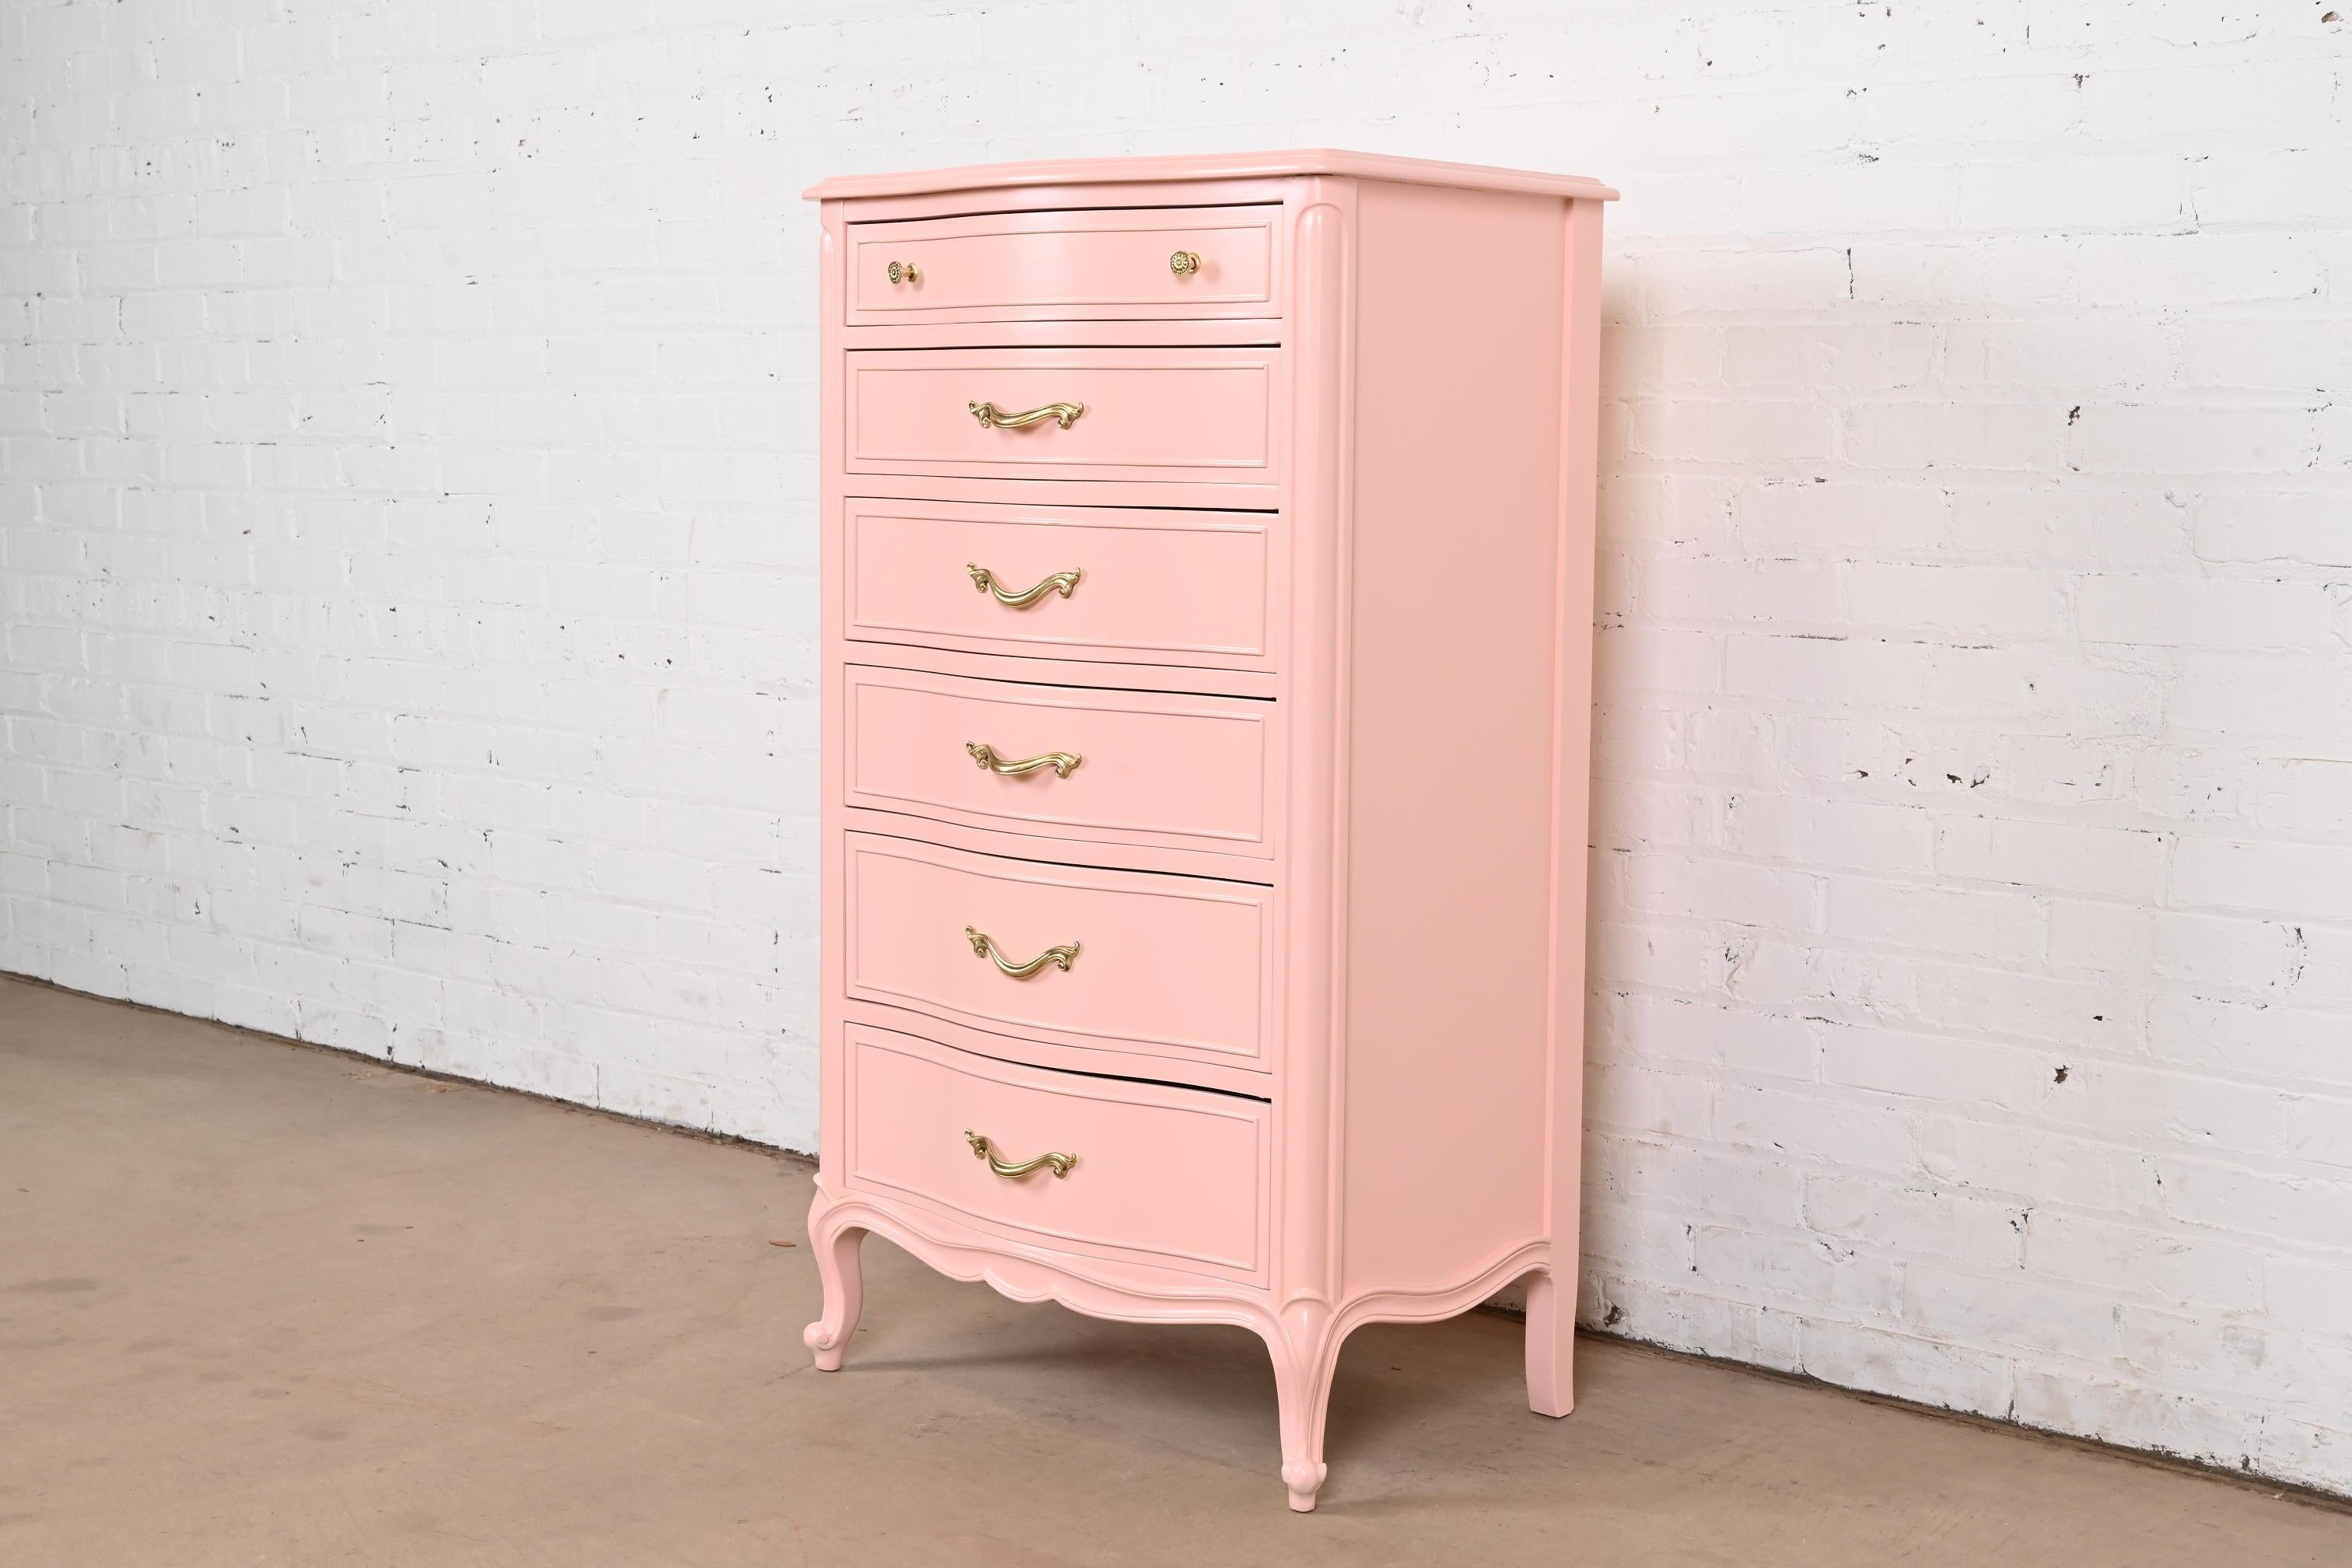 Drexel French Provincial Louis XV Pink Lacquered Lingerie Chest or Semainier In Good Condition For Sale In South Bend, IN